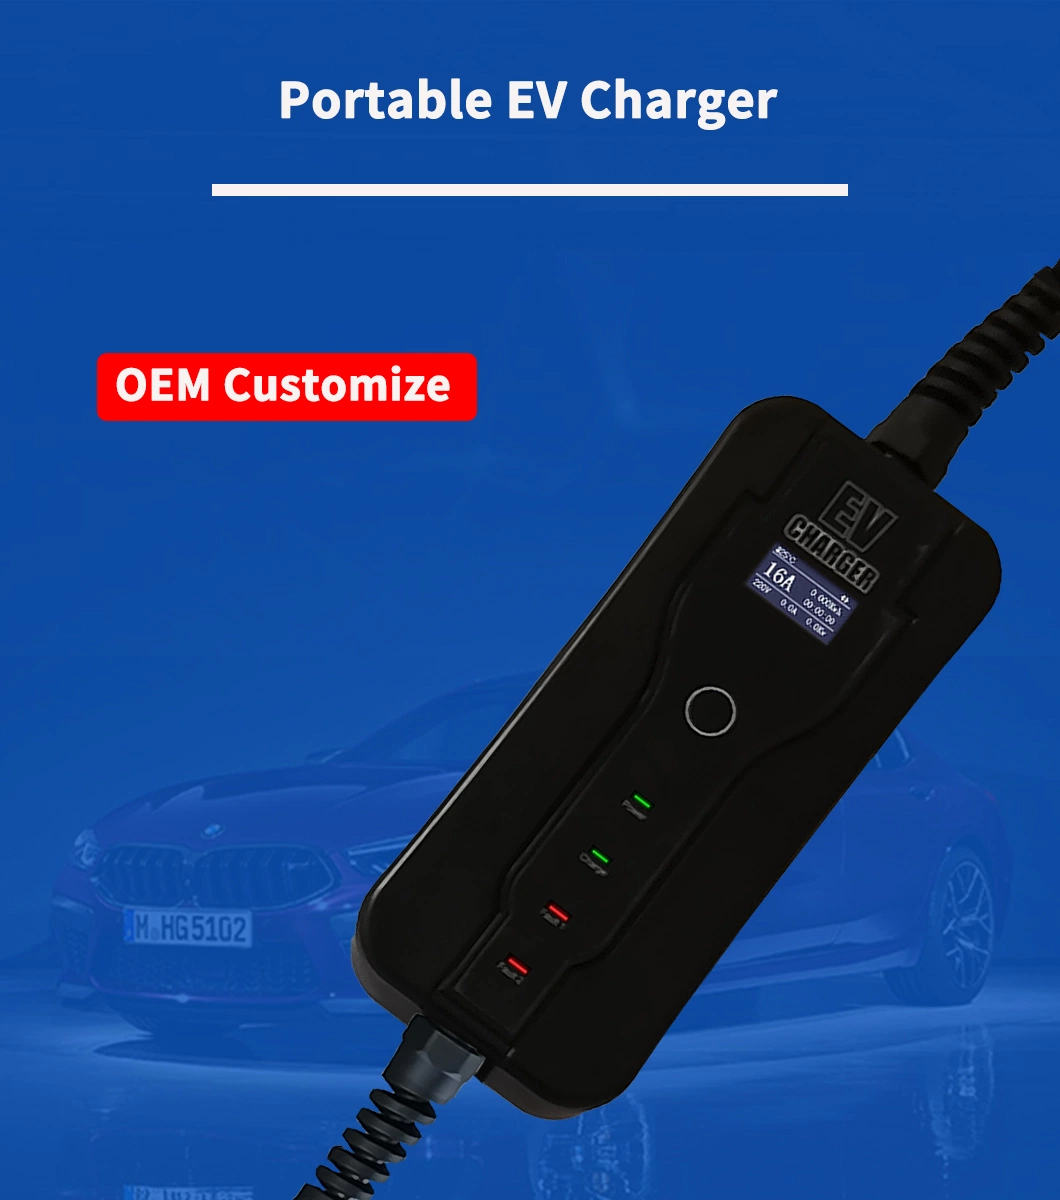 Portable/Mobile EV Charger 11 Kw Power Manage Level 2 Car Battery Charger OEM Electric Vehicle Charging Station